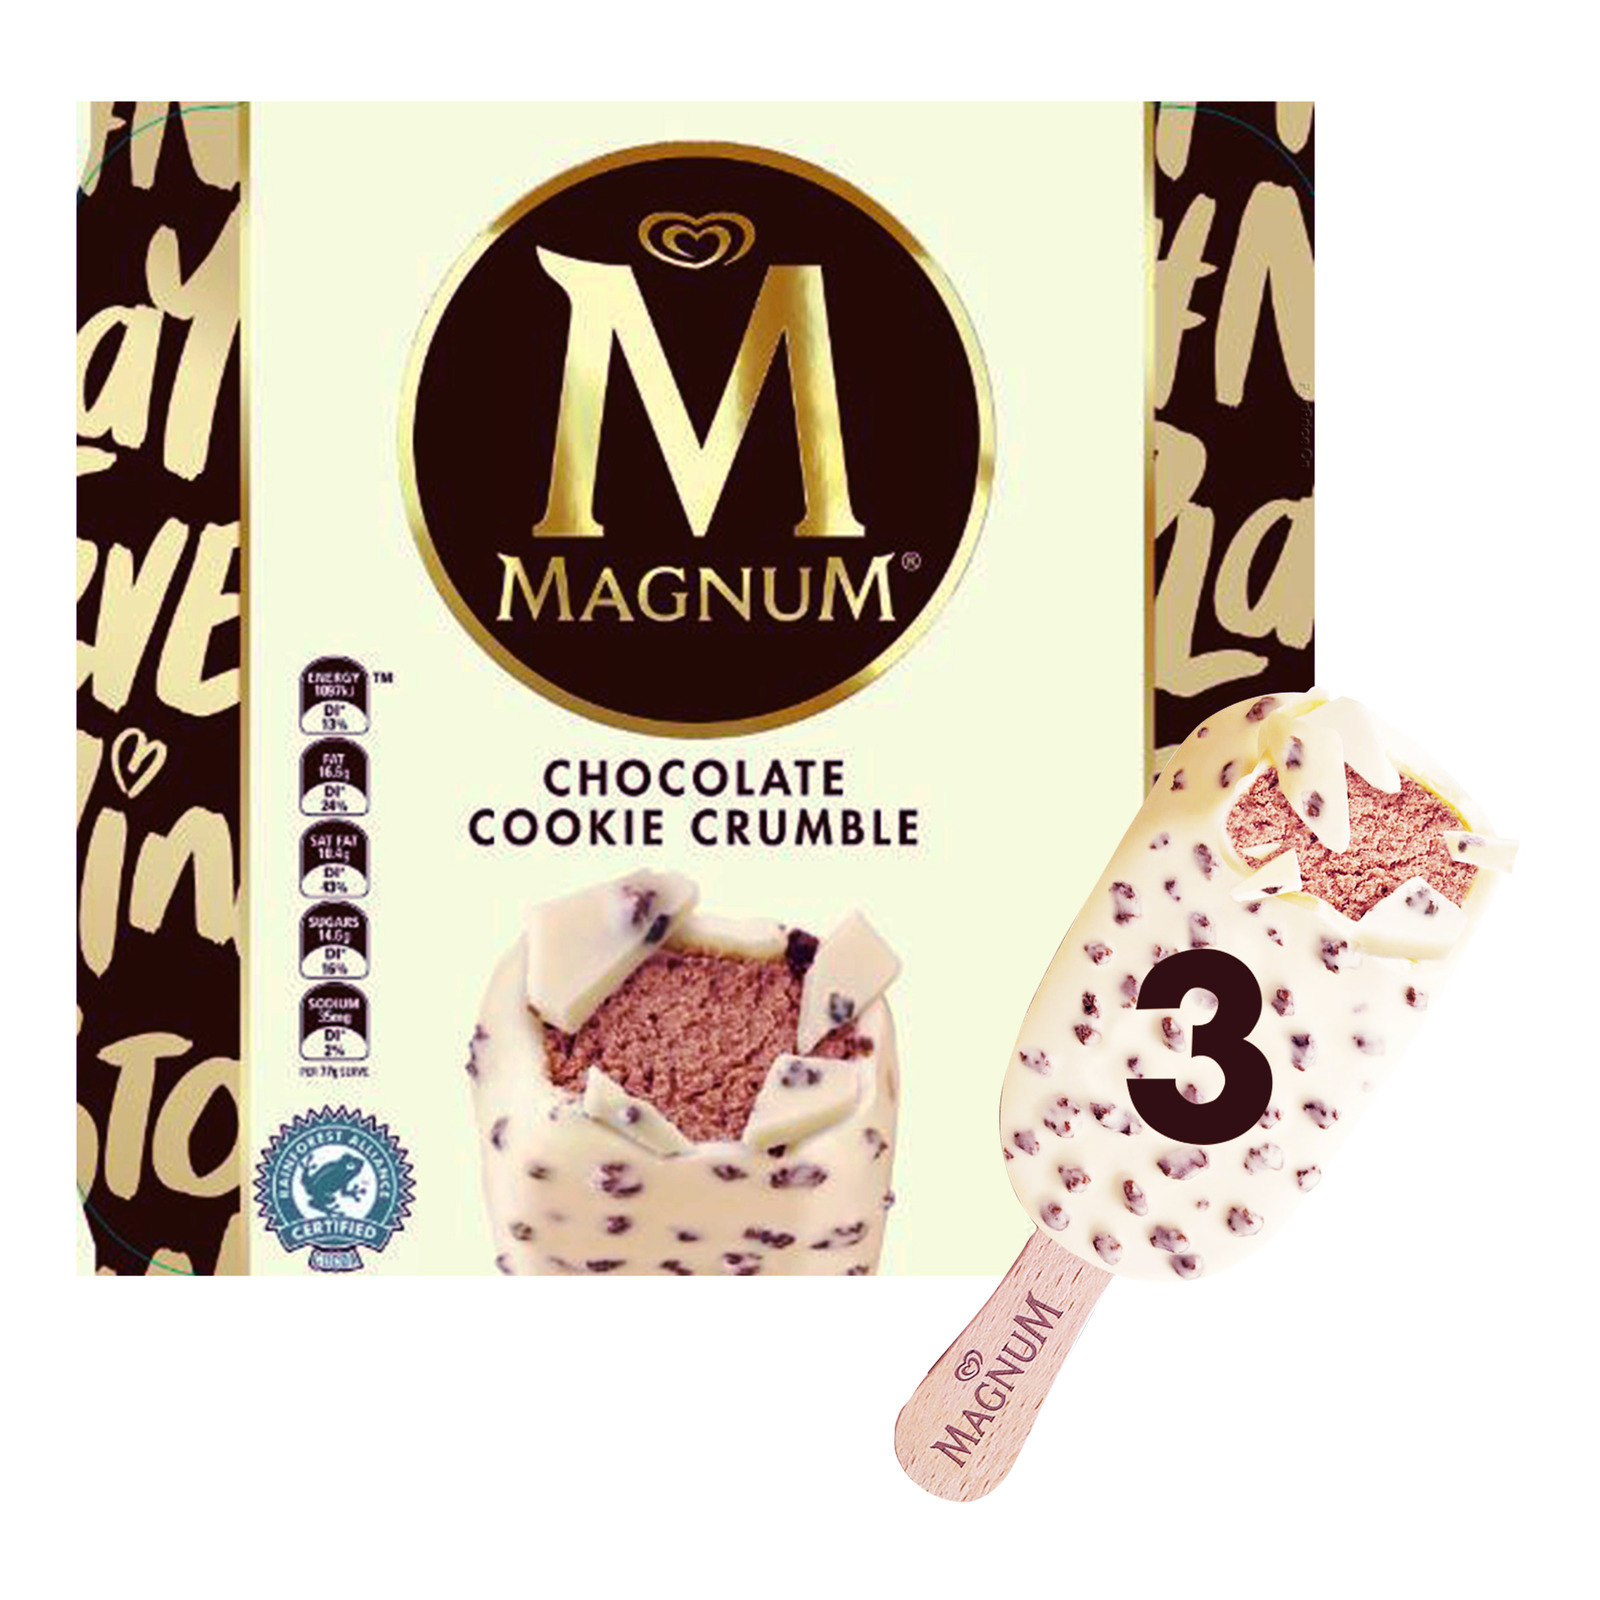 Magnum ice cream now at $1.86 each if you grab two boxes for $14.90 at ...